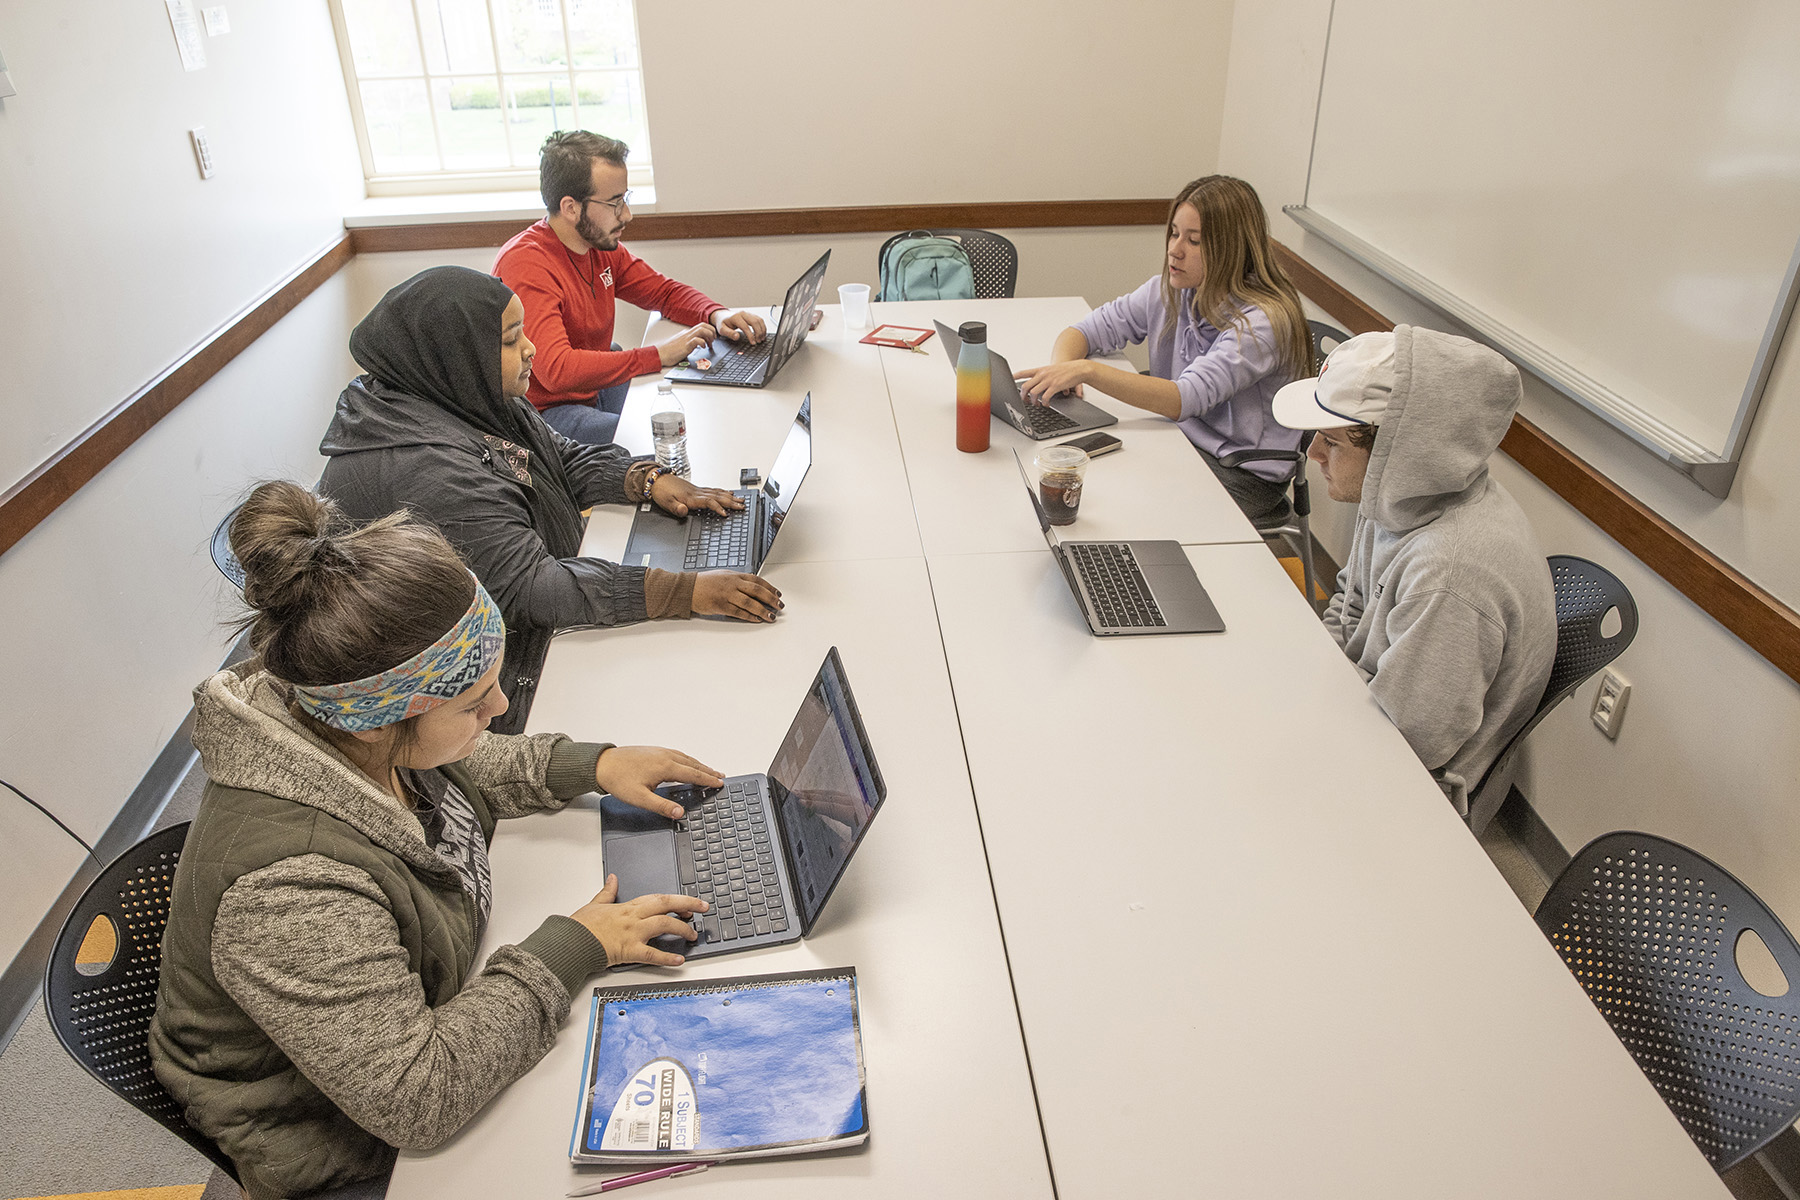 Five students sit around a conference table together.